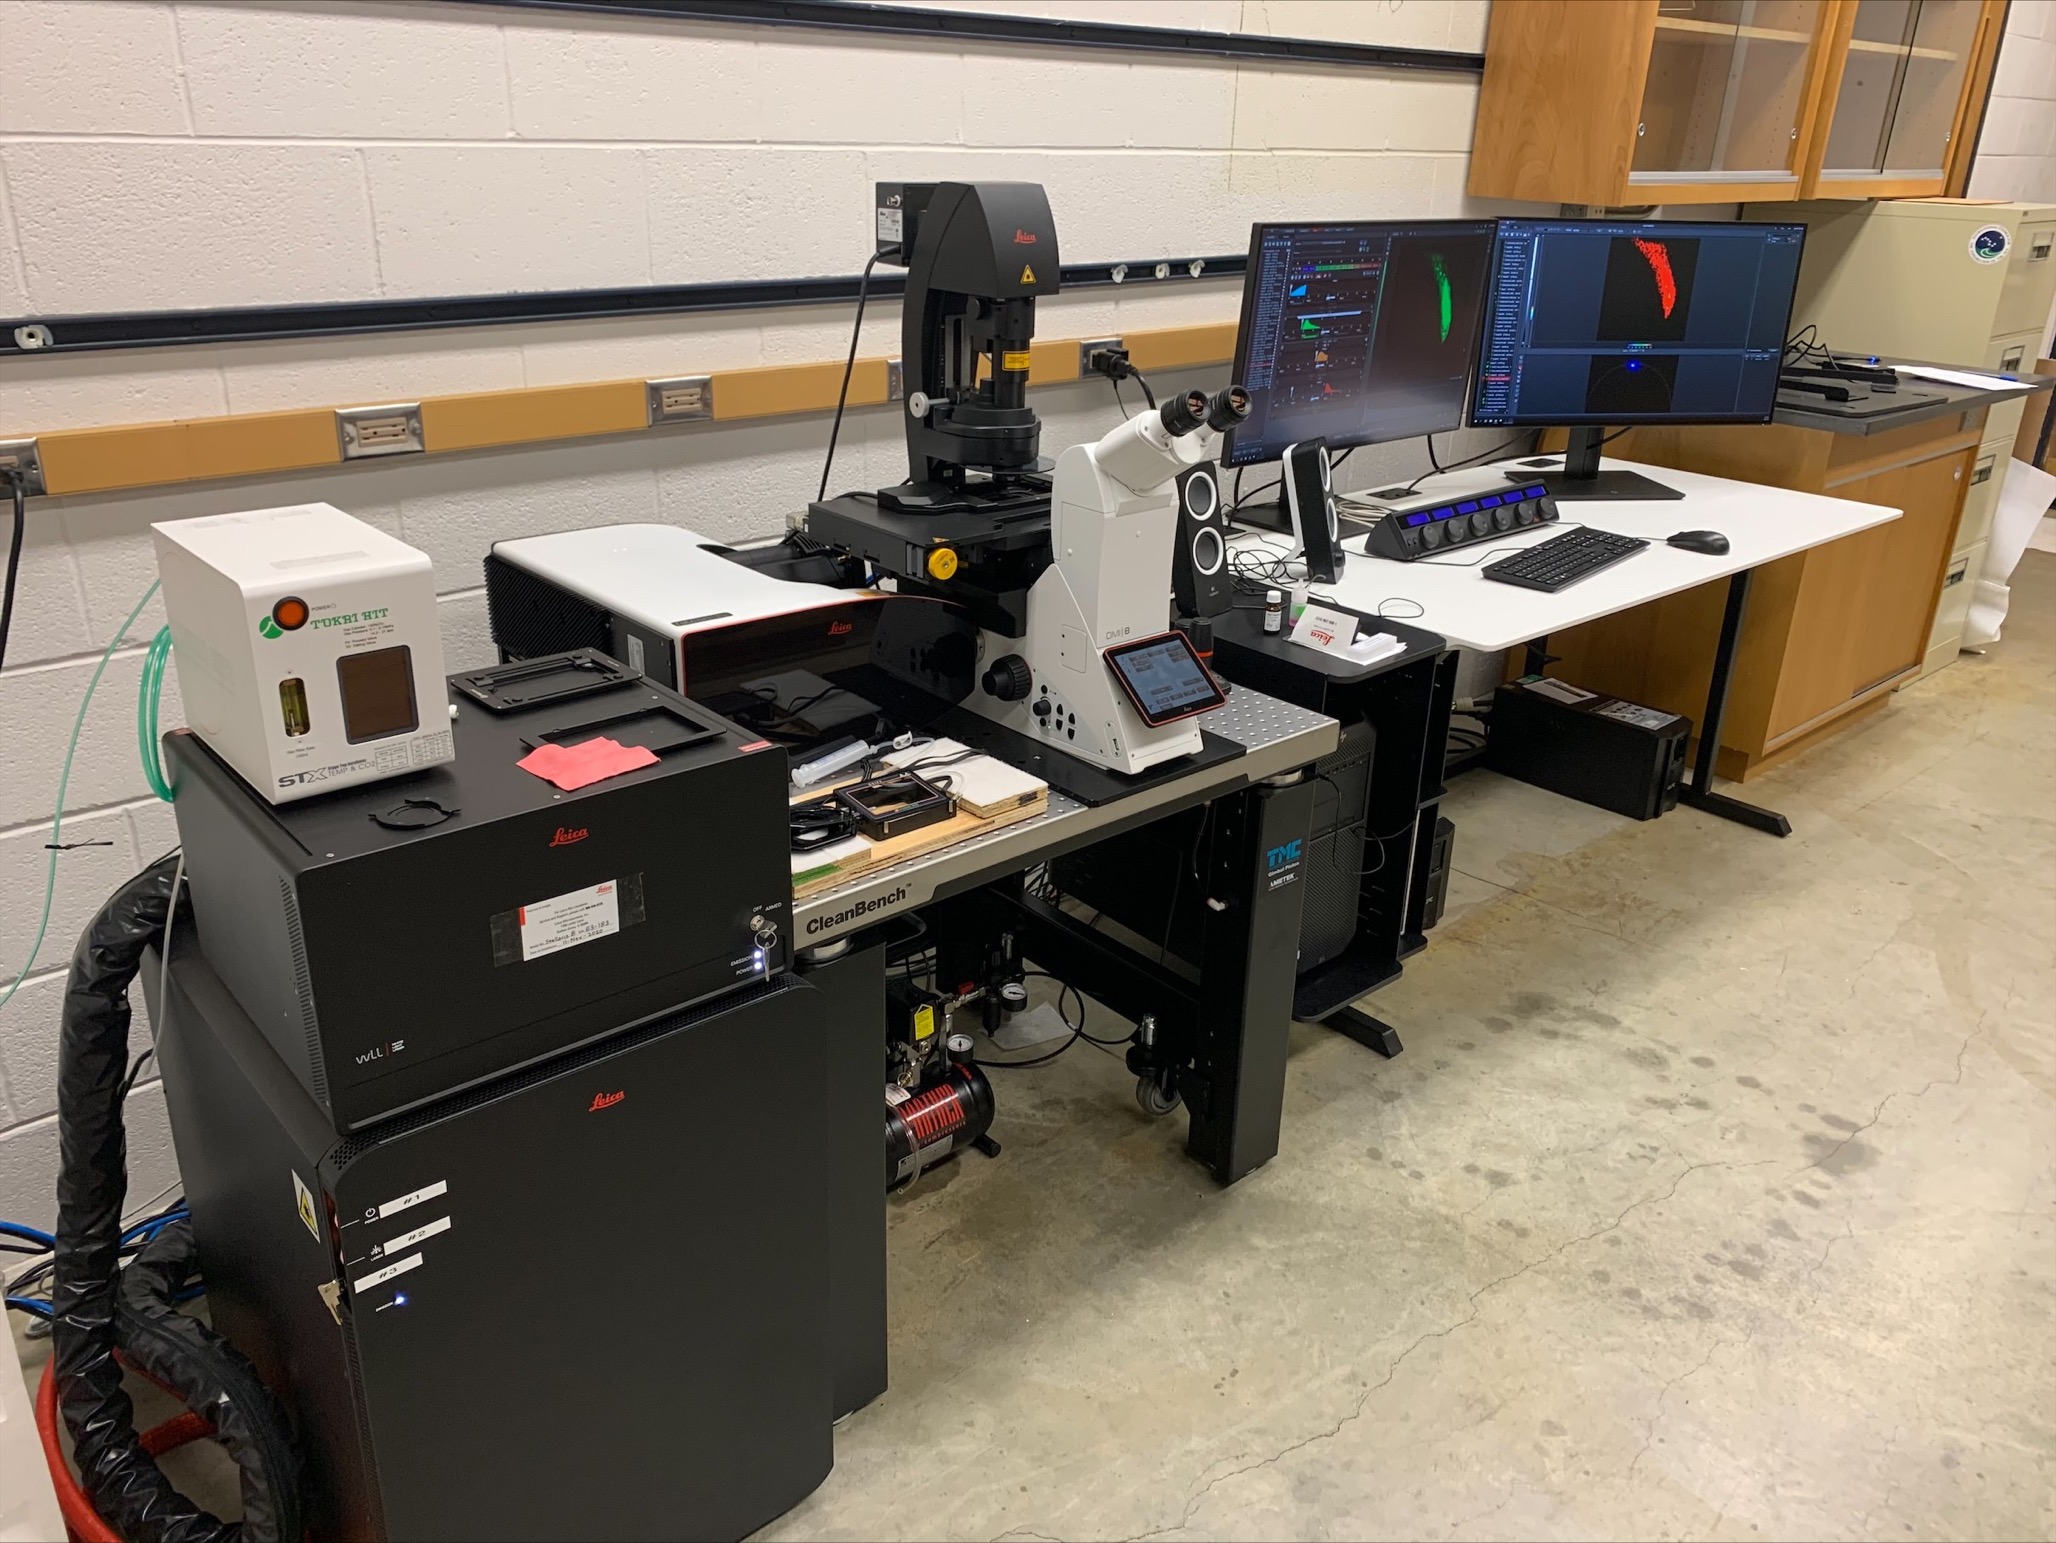 Photo of Confocal Stellaris Microscope with computer equipment